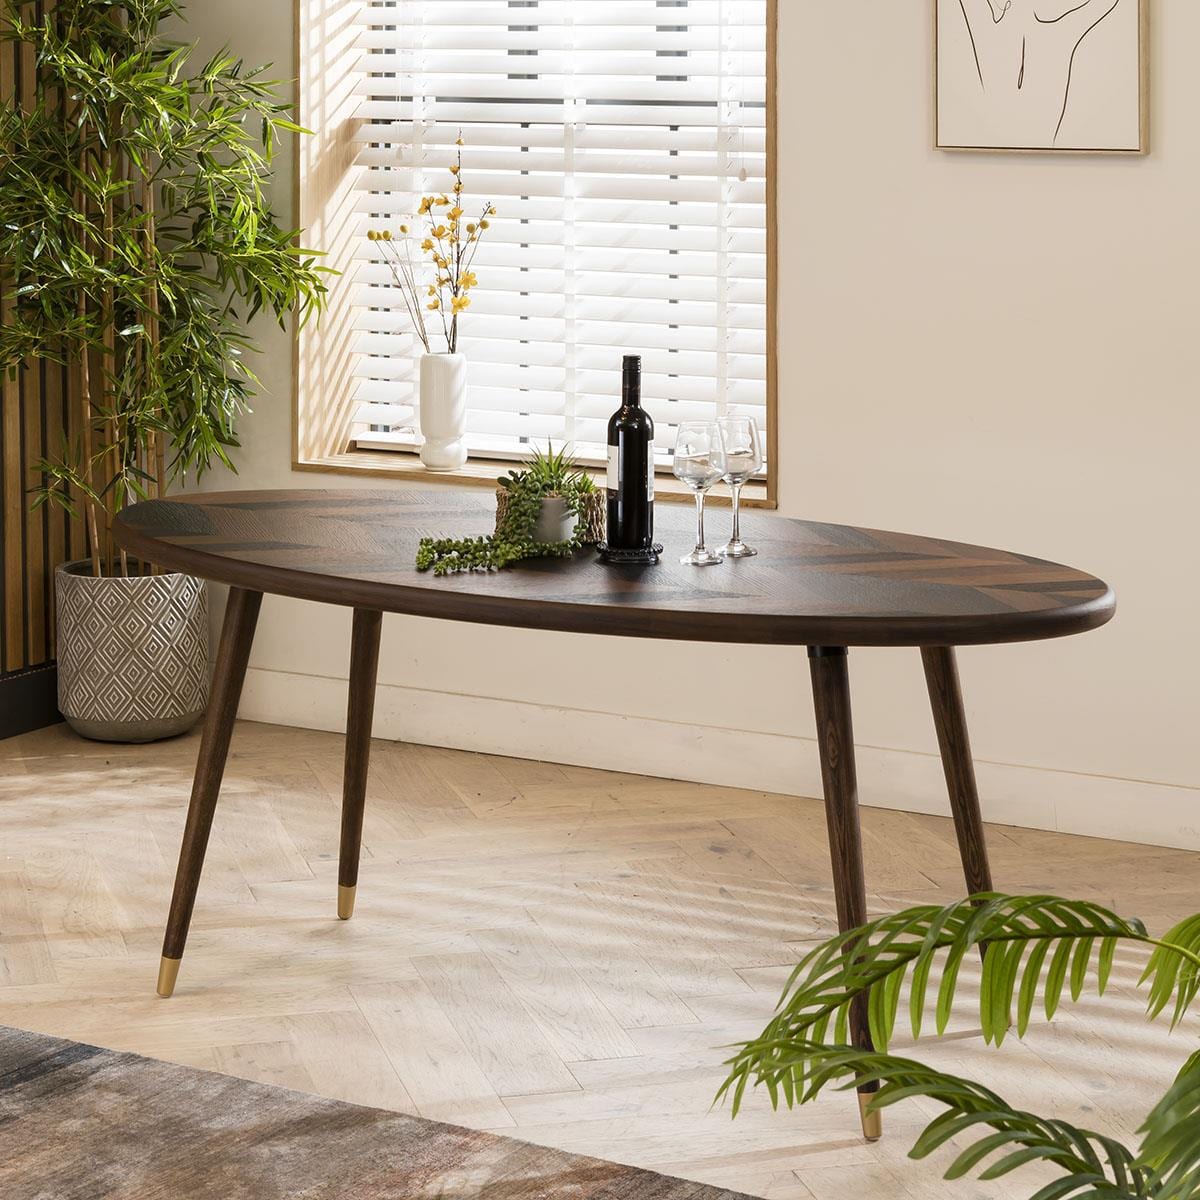 Quatropi Rodez 6 Seater Oval Dining Table Brown 180cm